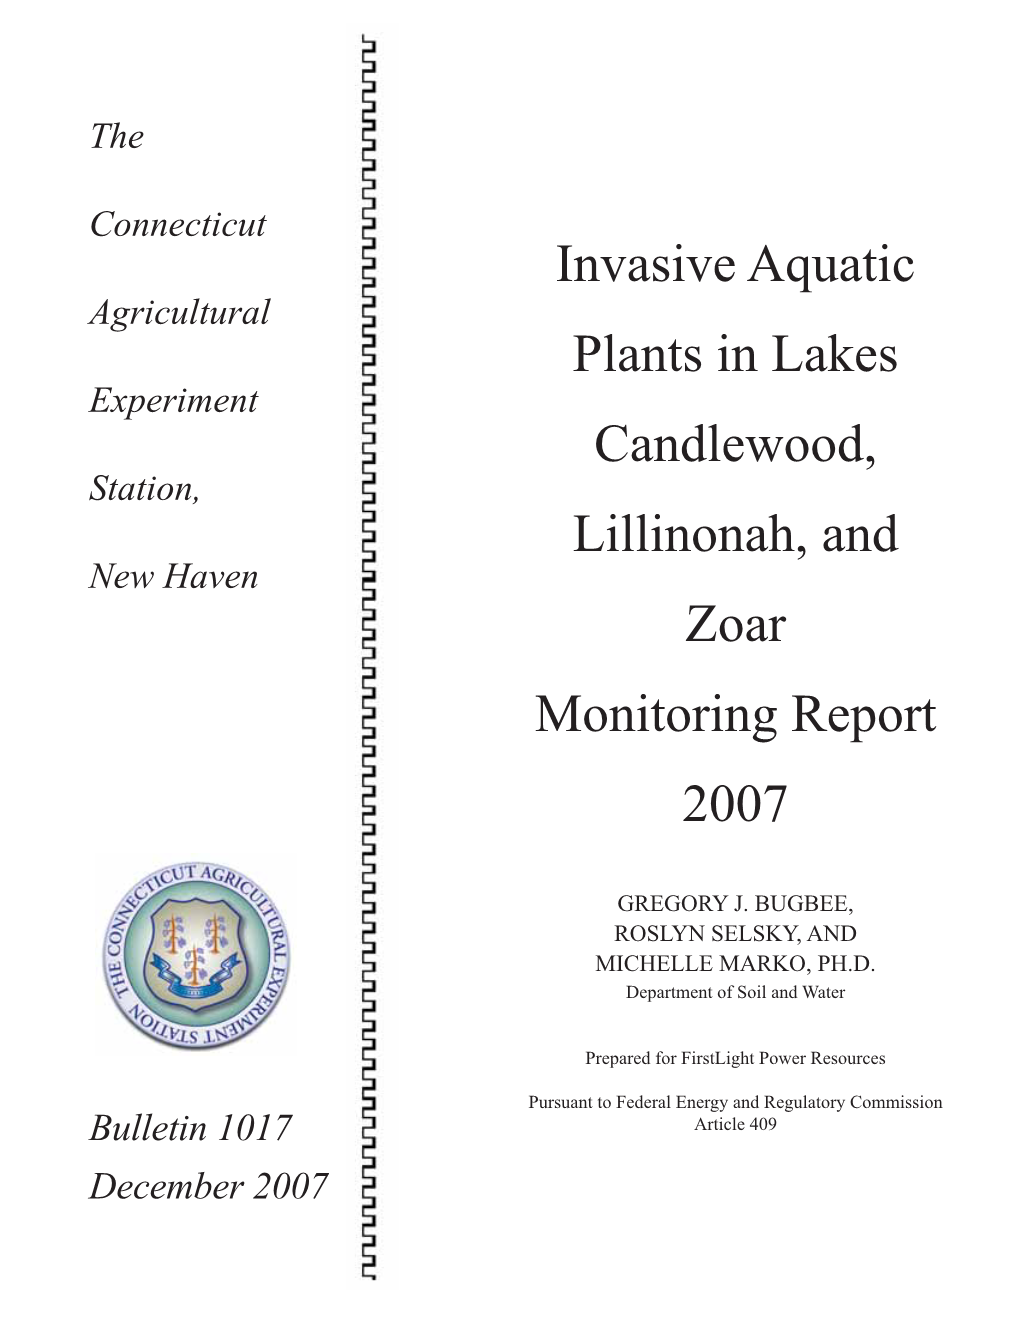 Invasive Aquatic Plants in Lakes Candlewood, Lillinonah, and Zoar Monitoring Report 2007 3